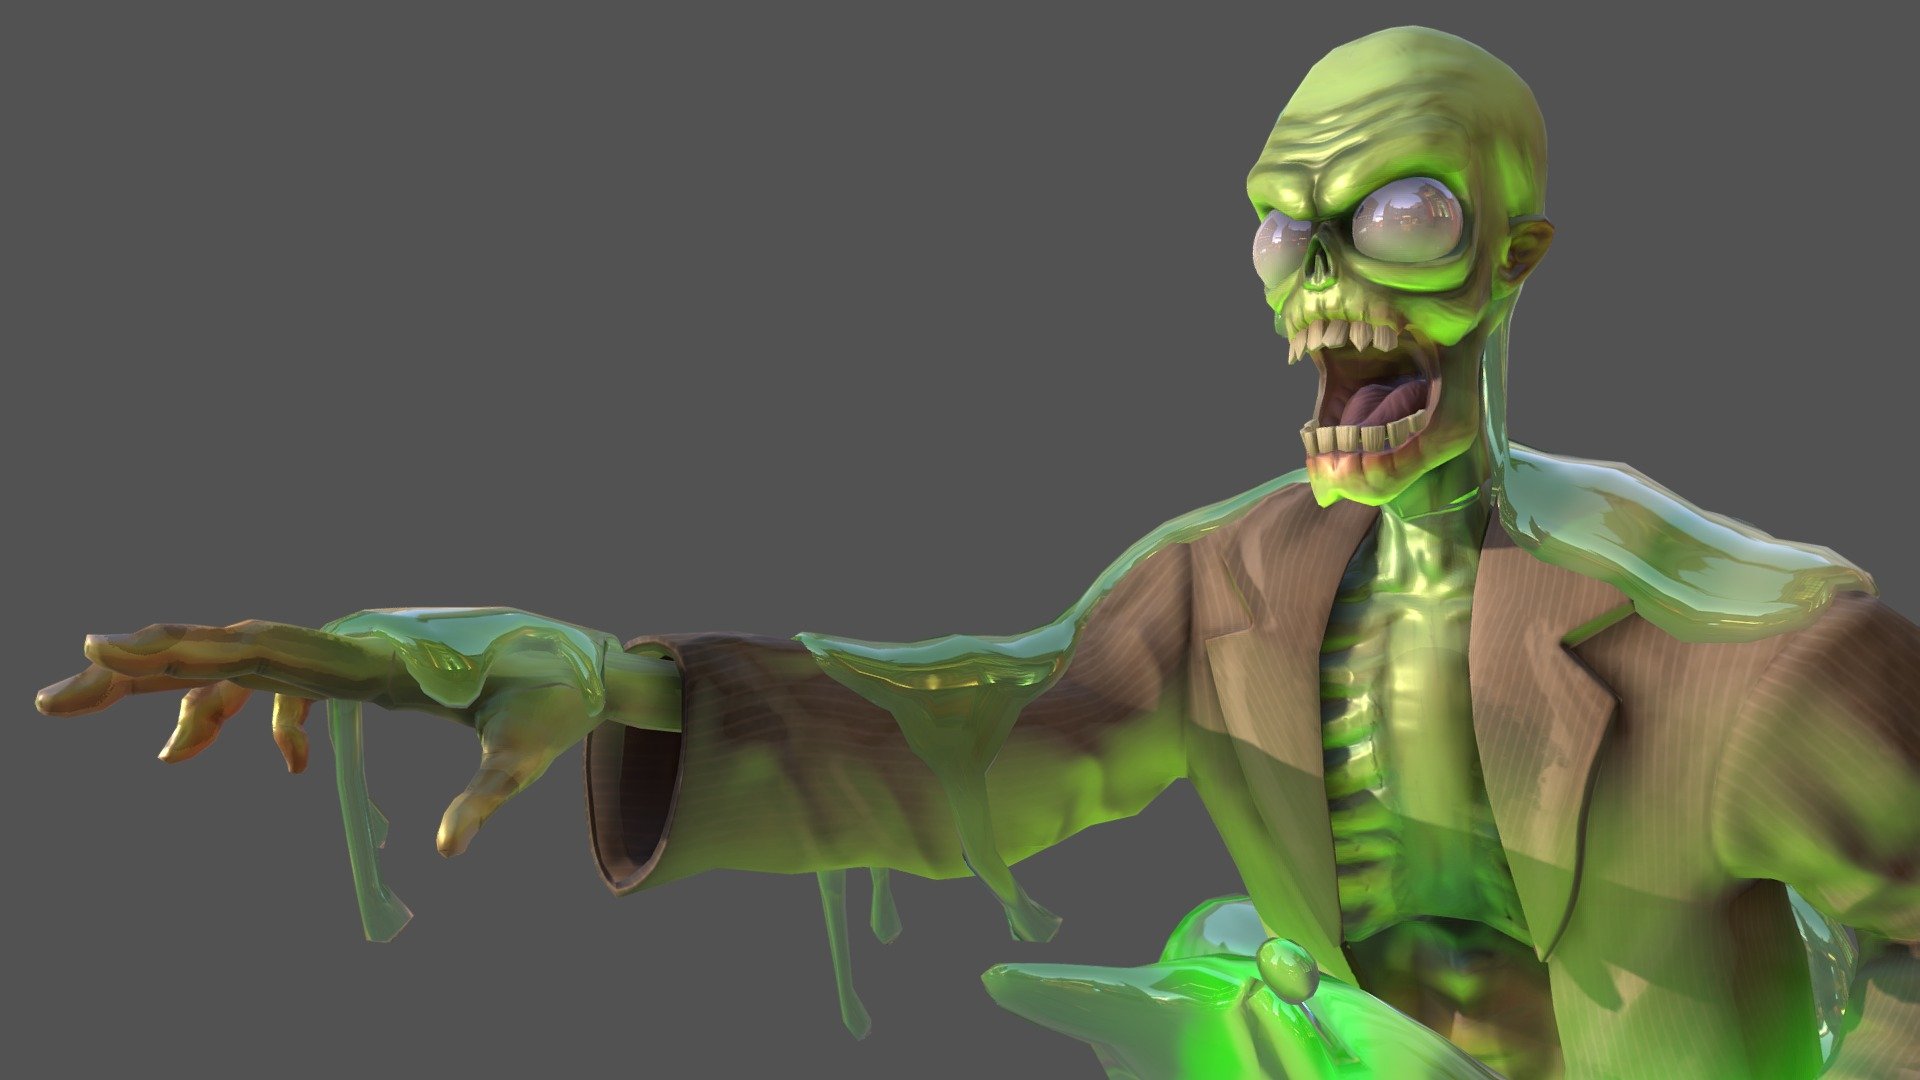 NEW! - Toxic Zombie in a Barrel